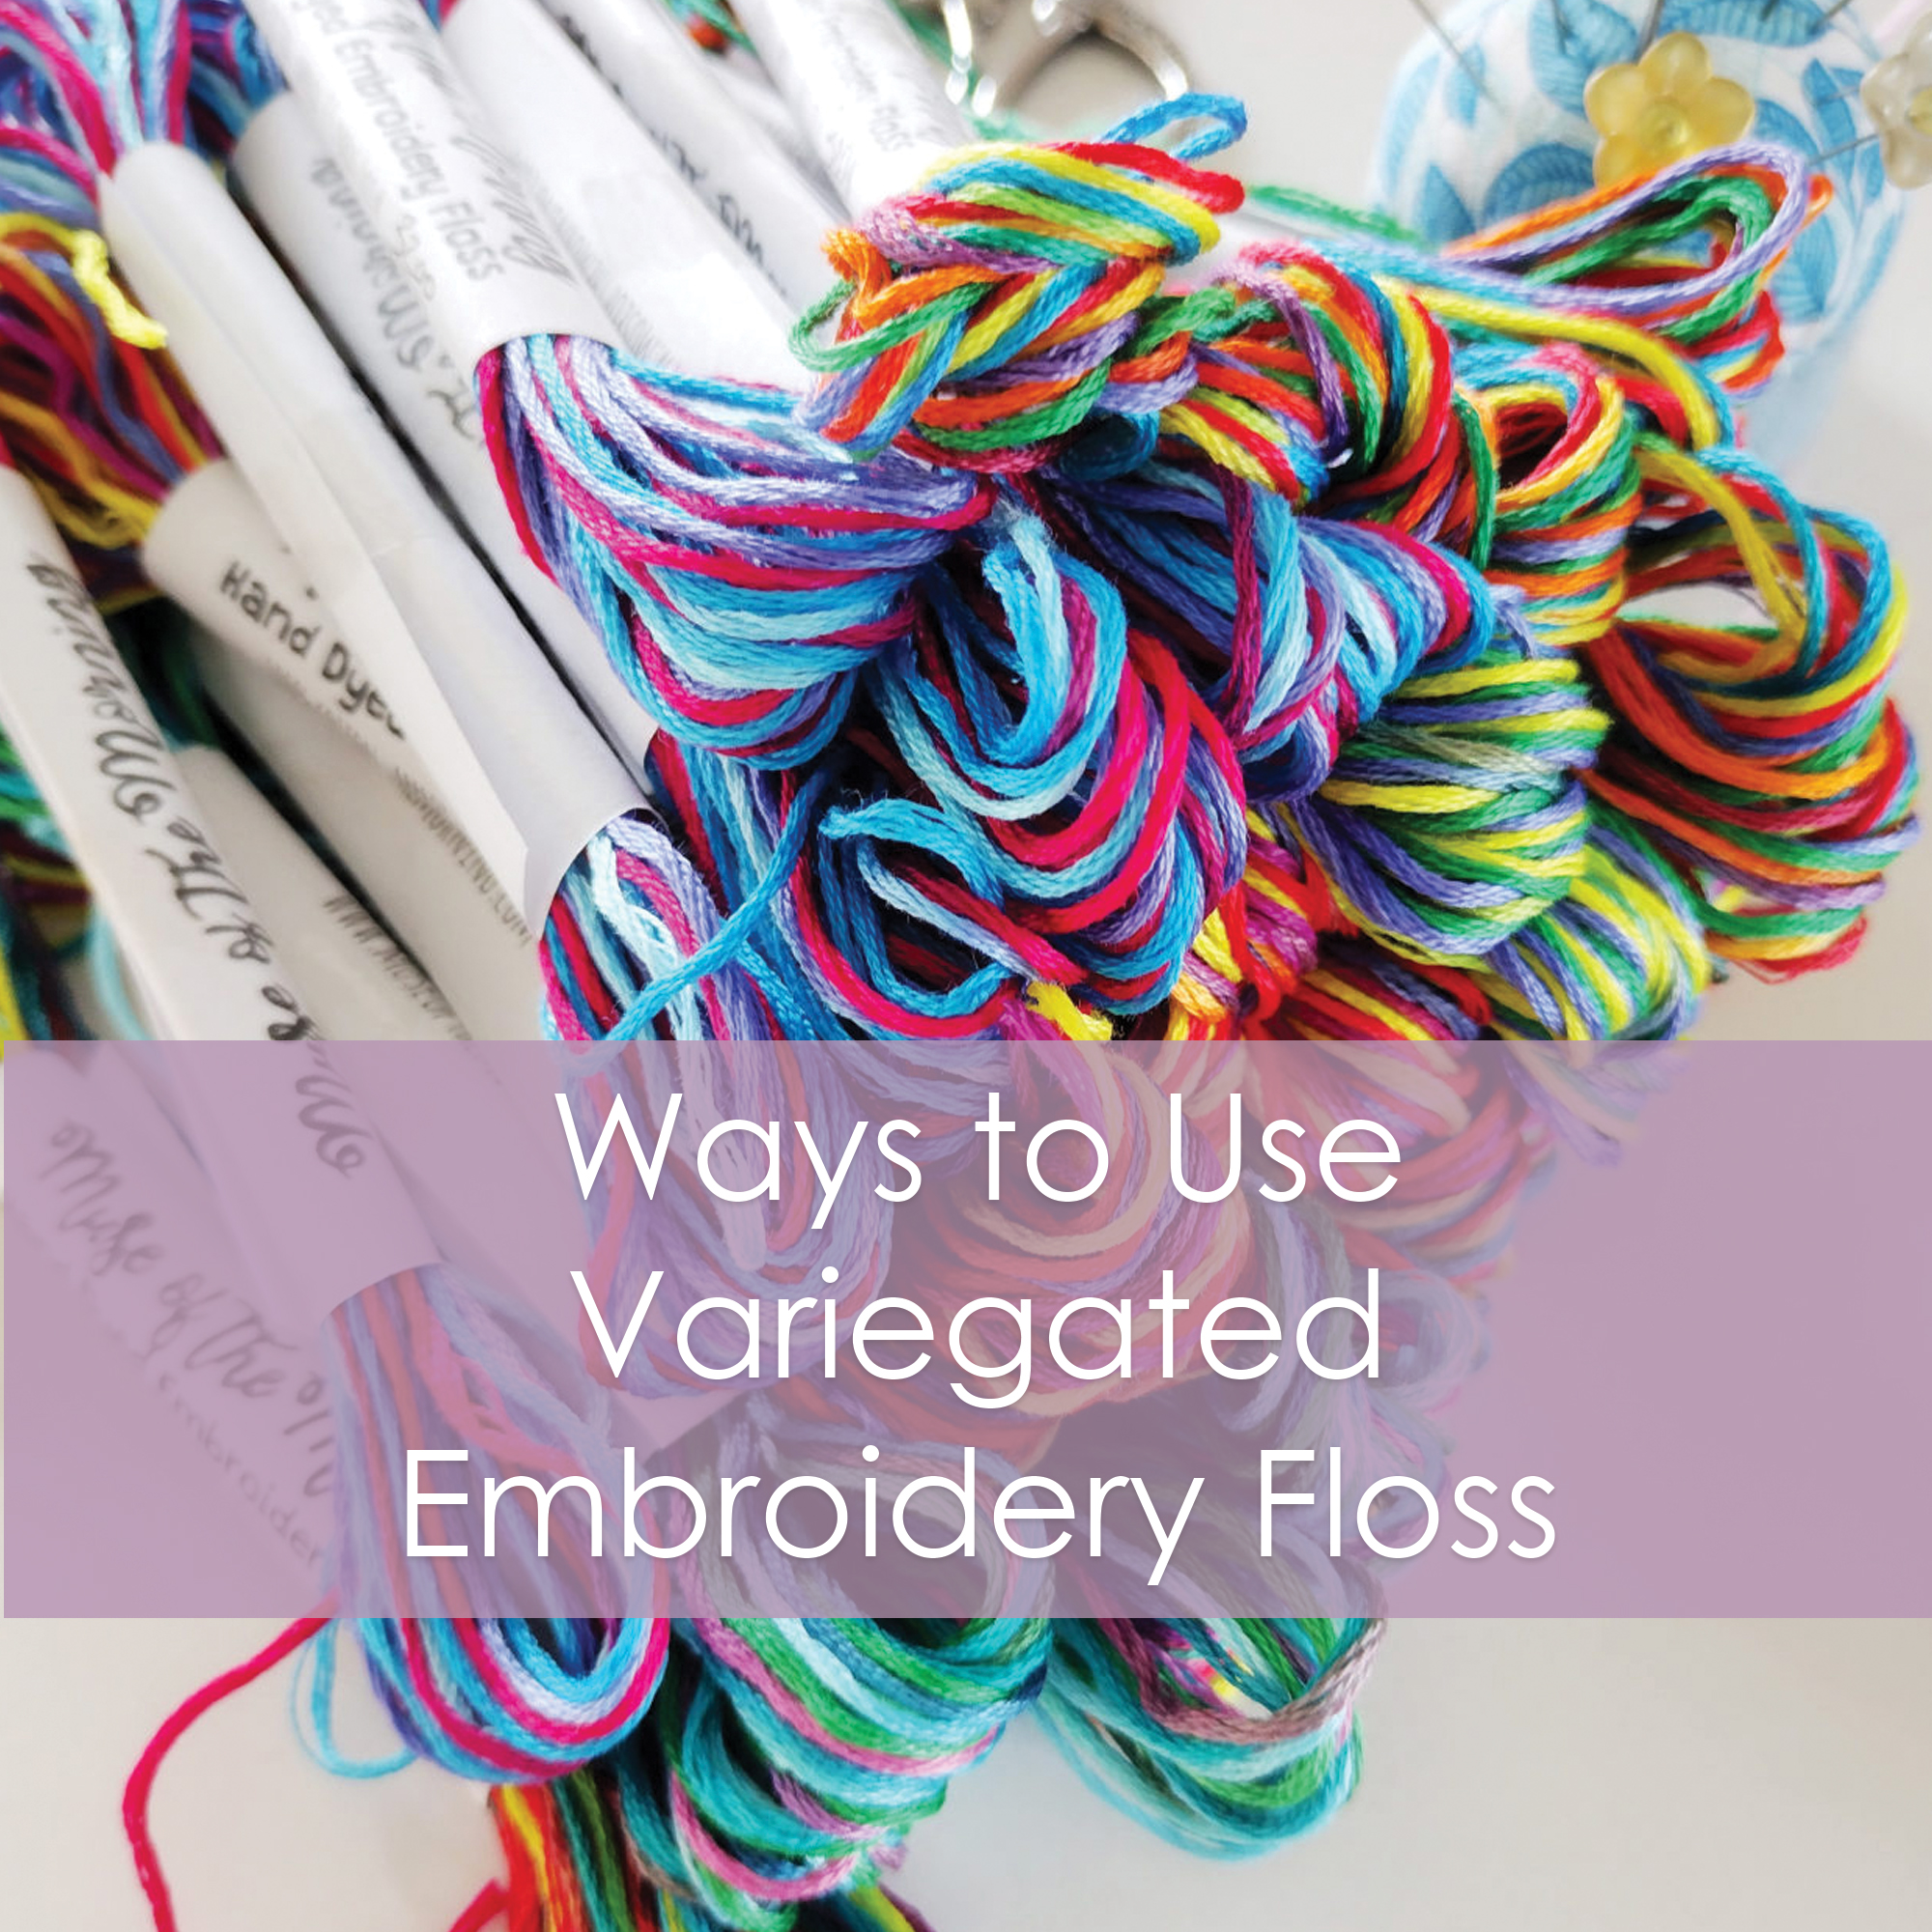 Ways to Use Variegated Embroidery Floss - a post from Muse of the Morning